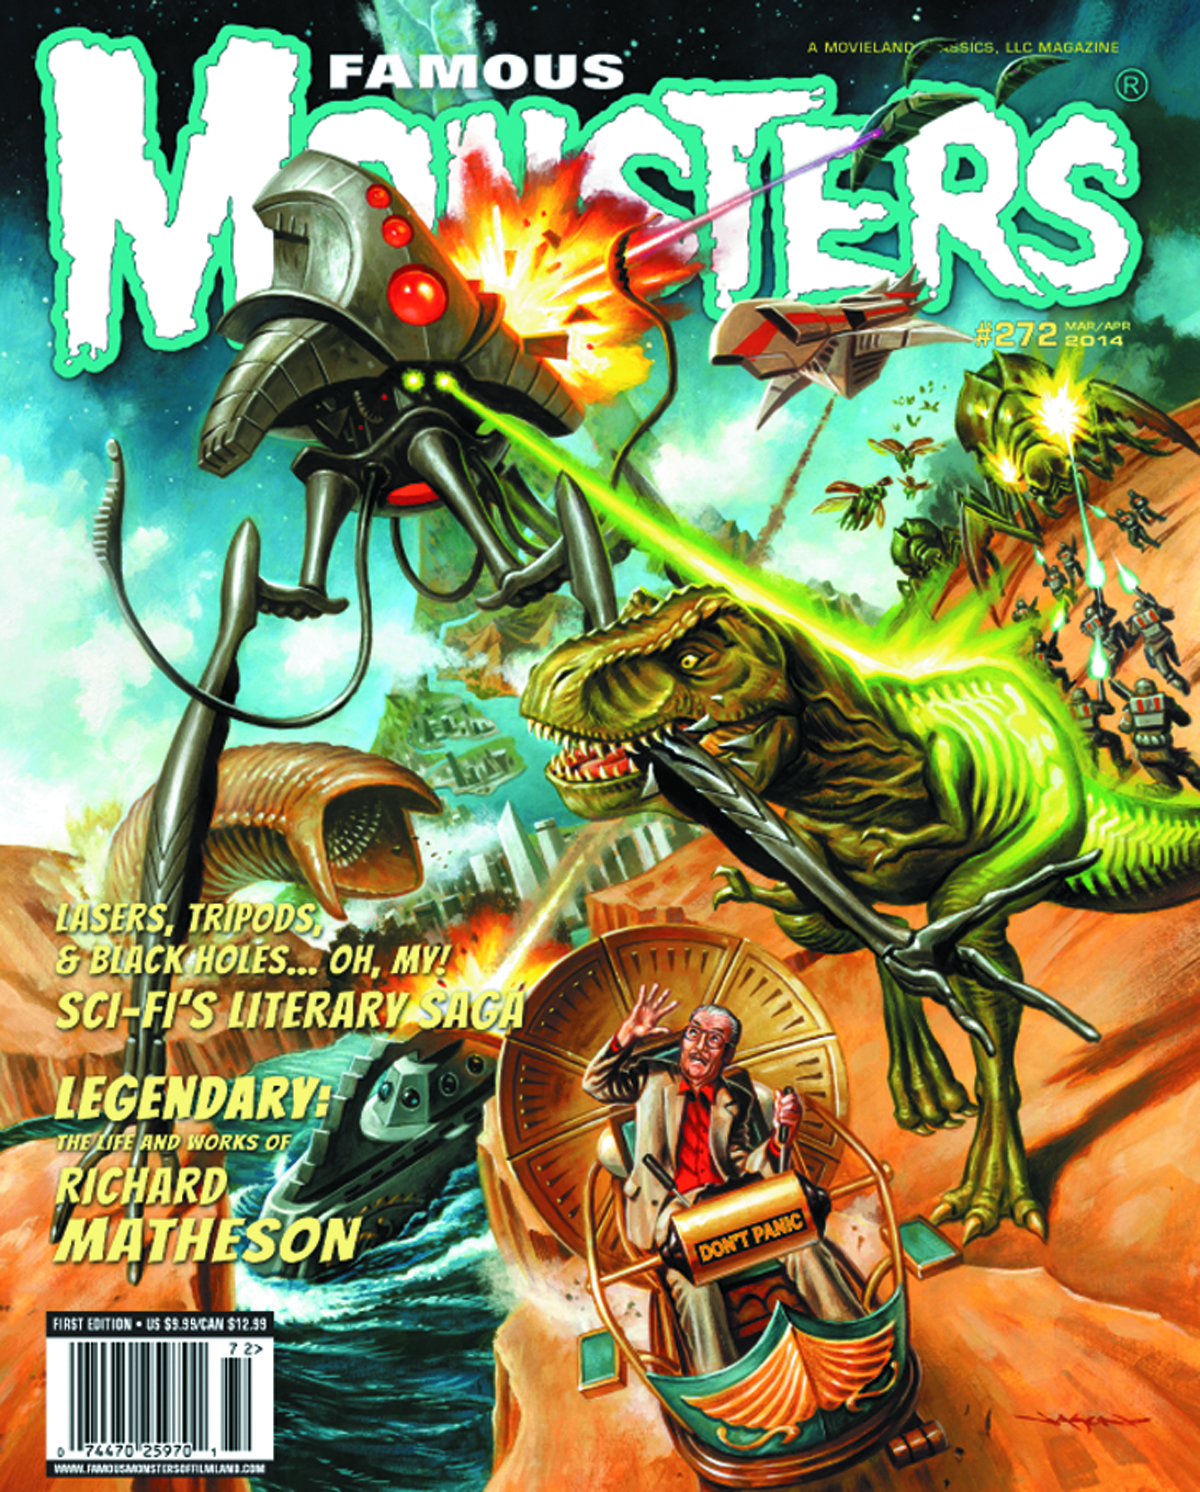 FAMOUS MONSTERS OF FILMLAND #272 HISTORY OF SCI-FI COVER